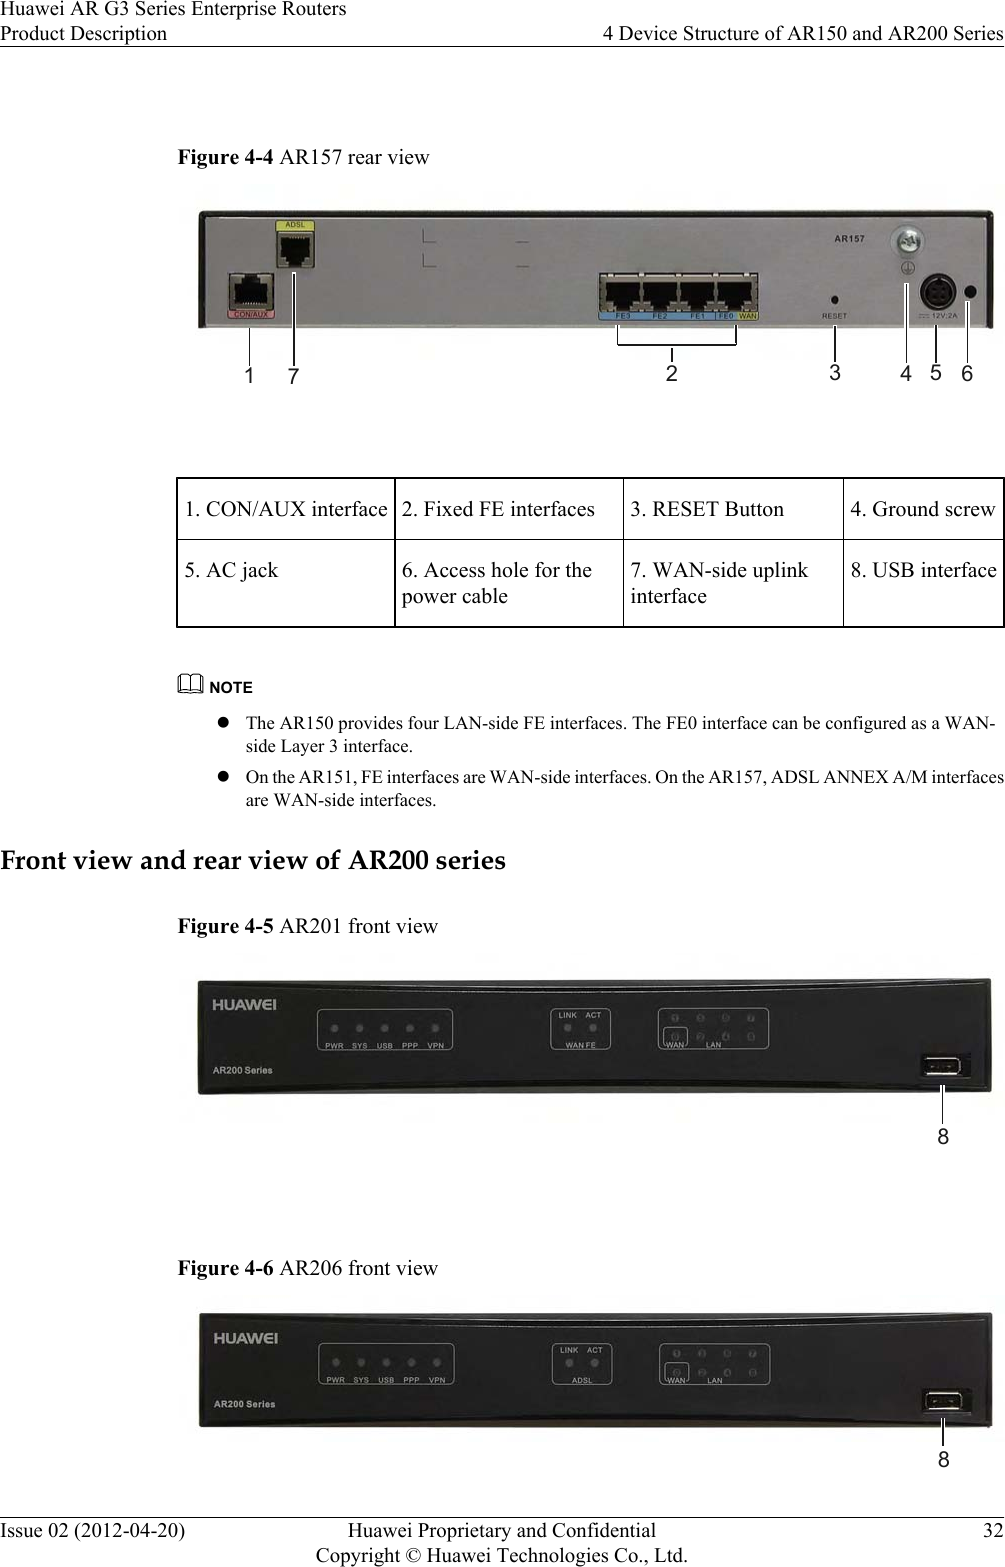  Figure 4-4 AR157 rear view7123564 1. CON/AUX interface 2. Fixed FE interfaces 3. RESET Button 4. Ground screw5. AC jack 6. Access hole for thepower cable7. WAN-side uplinkinterface8. USB interfaceNOTElThe AR150 provides four LAN-side FE interfaces. The FE0 interface can be configured as a WAN-side Layer 3 interface.lOn the AR151, FE interfaces are WAN-side interfaces. On the AR157, ADSL ANNEX A/M interfacesare WAN-side interfaces.Front view and rear view of AR200 seriesFigure 4-5 AR201 front view8 Figure 4-6 AR206 front view8Huawei AR G3 Series Enterprise RoutersProduct Description 4 Device Structure of AR150 and AR200 SeriesIssue 02 (2012-04-20) Huawei Proprietary and ConfidentialCopyright © Huawei Technologies Co., Ltd.32